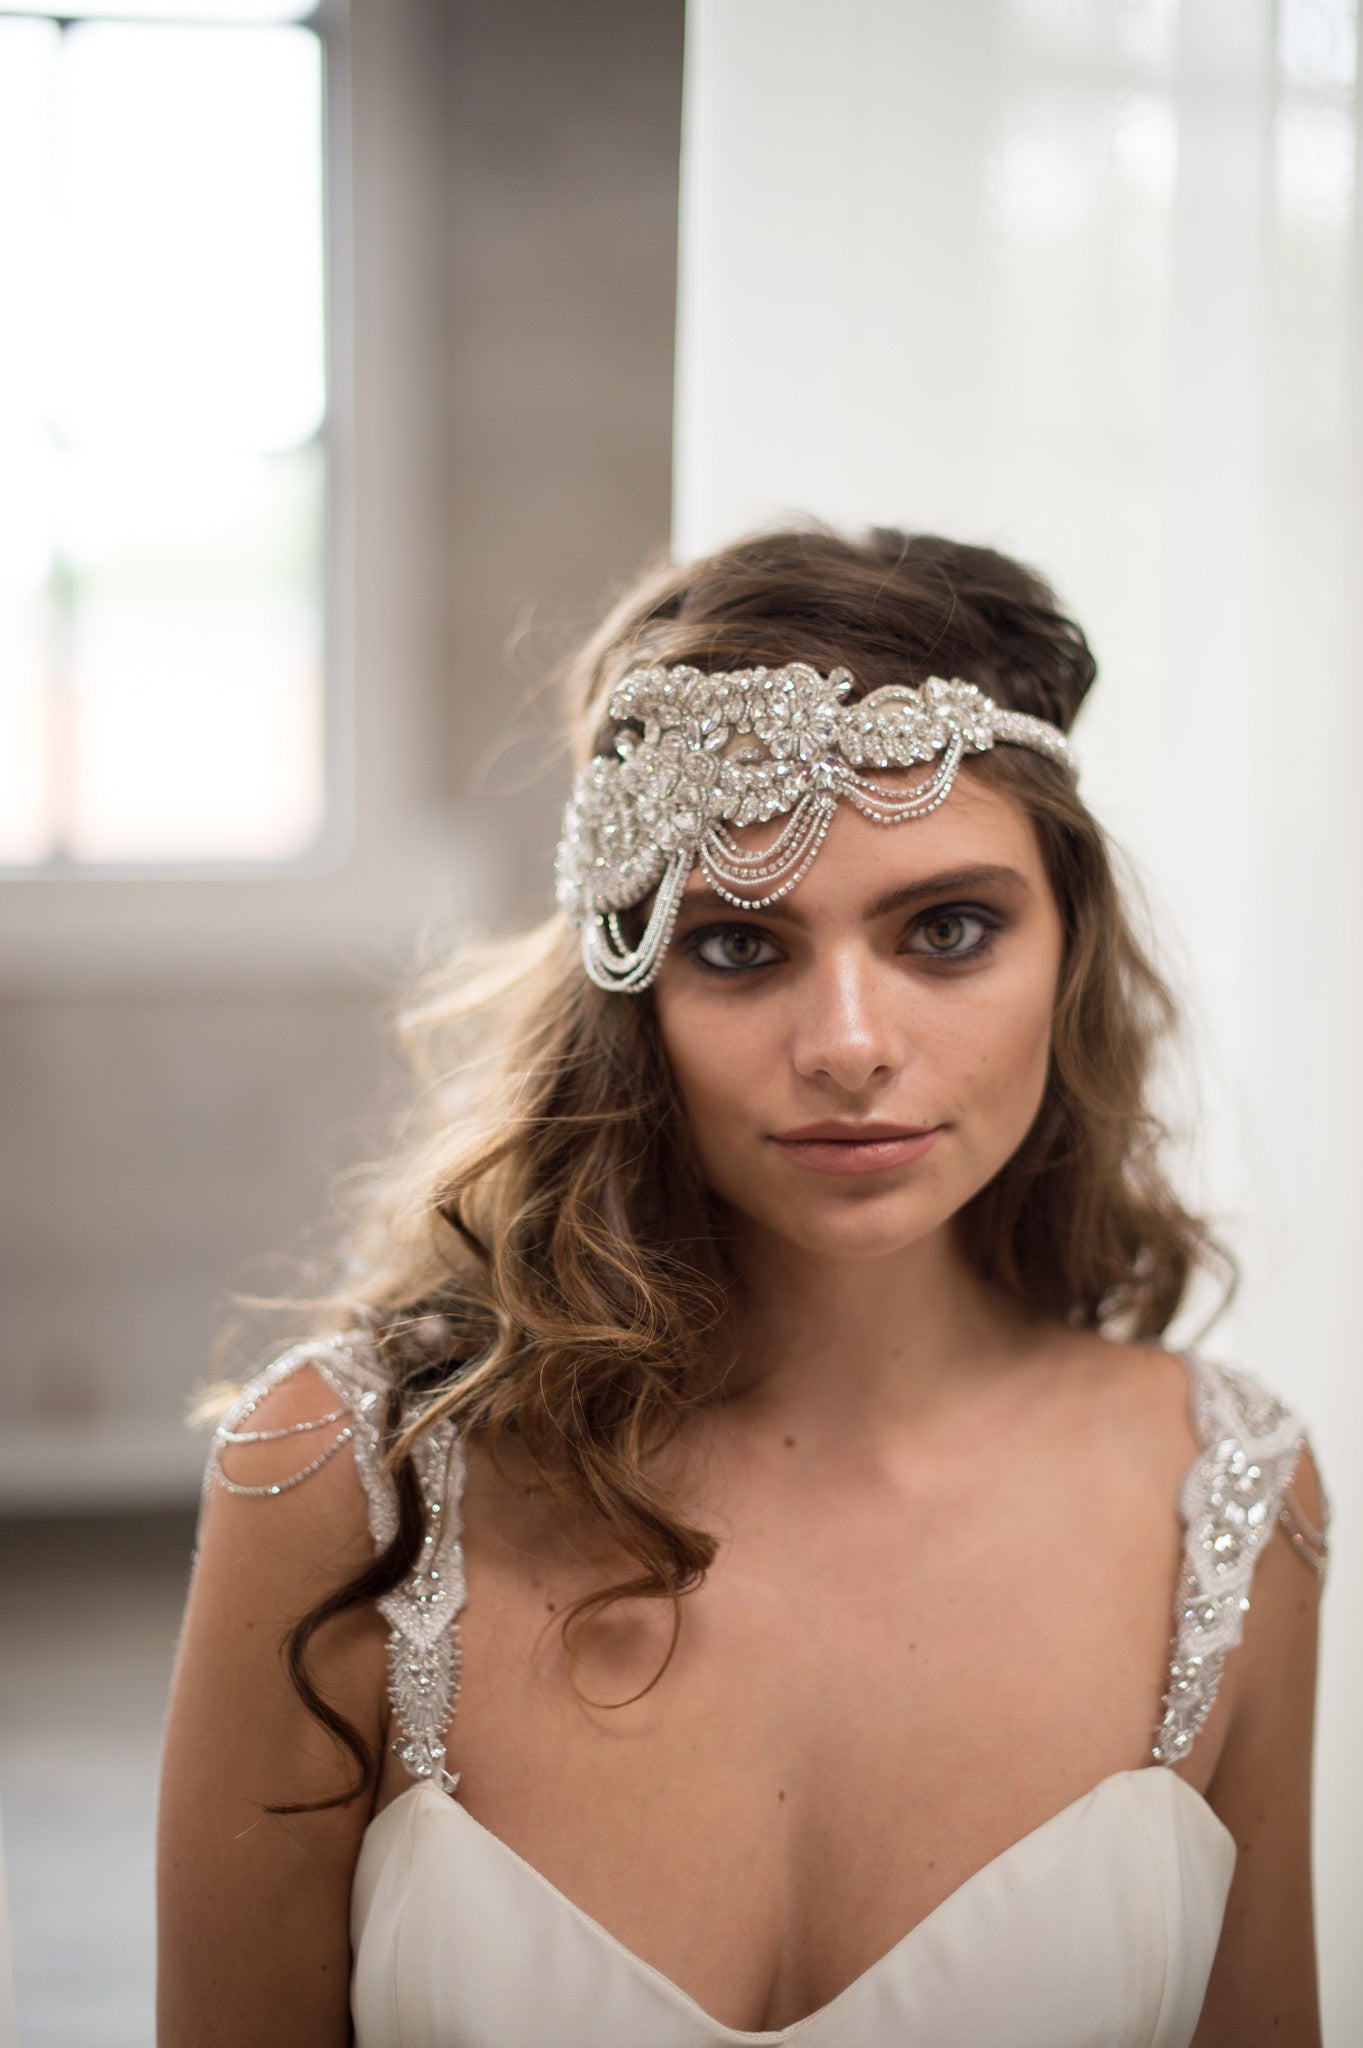 Bridal Accessories and Wedding Jewelry, Camilla Christine, Headpiece, Headdress, Halo, Faith Headpiece, Silver, Great Gatsby Inspired Floral & Vine Design wtih Crystal Chain Swag Headpiece